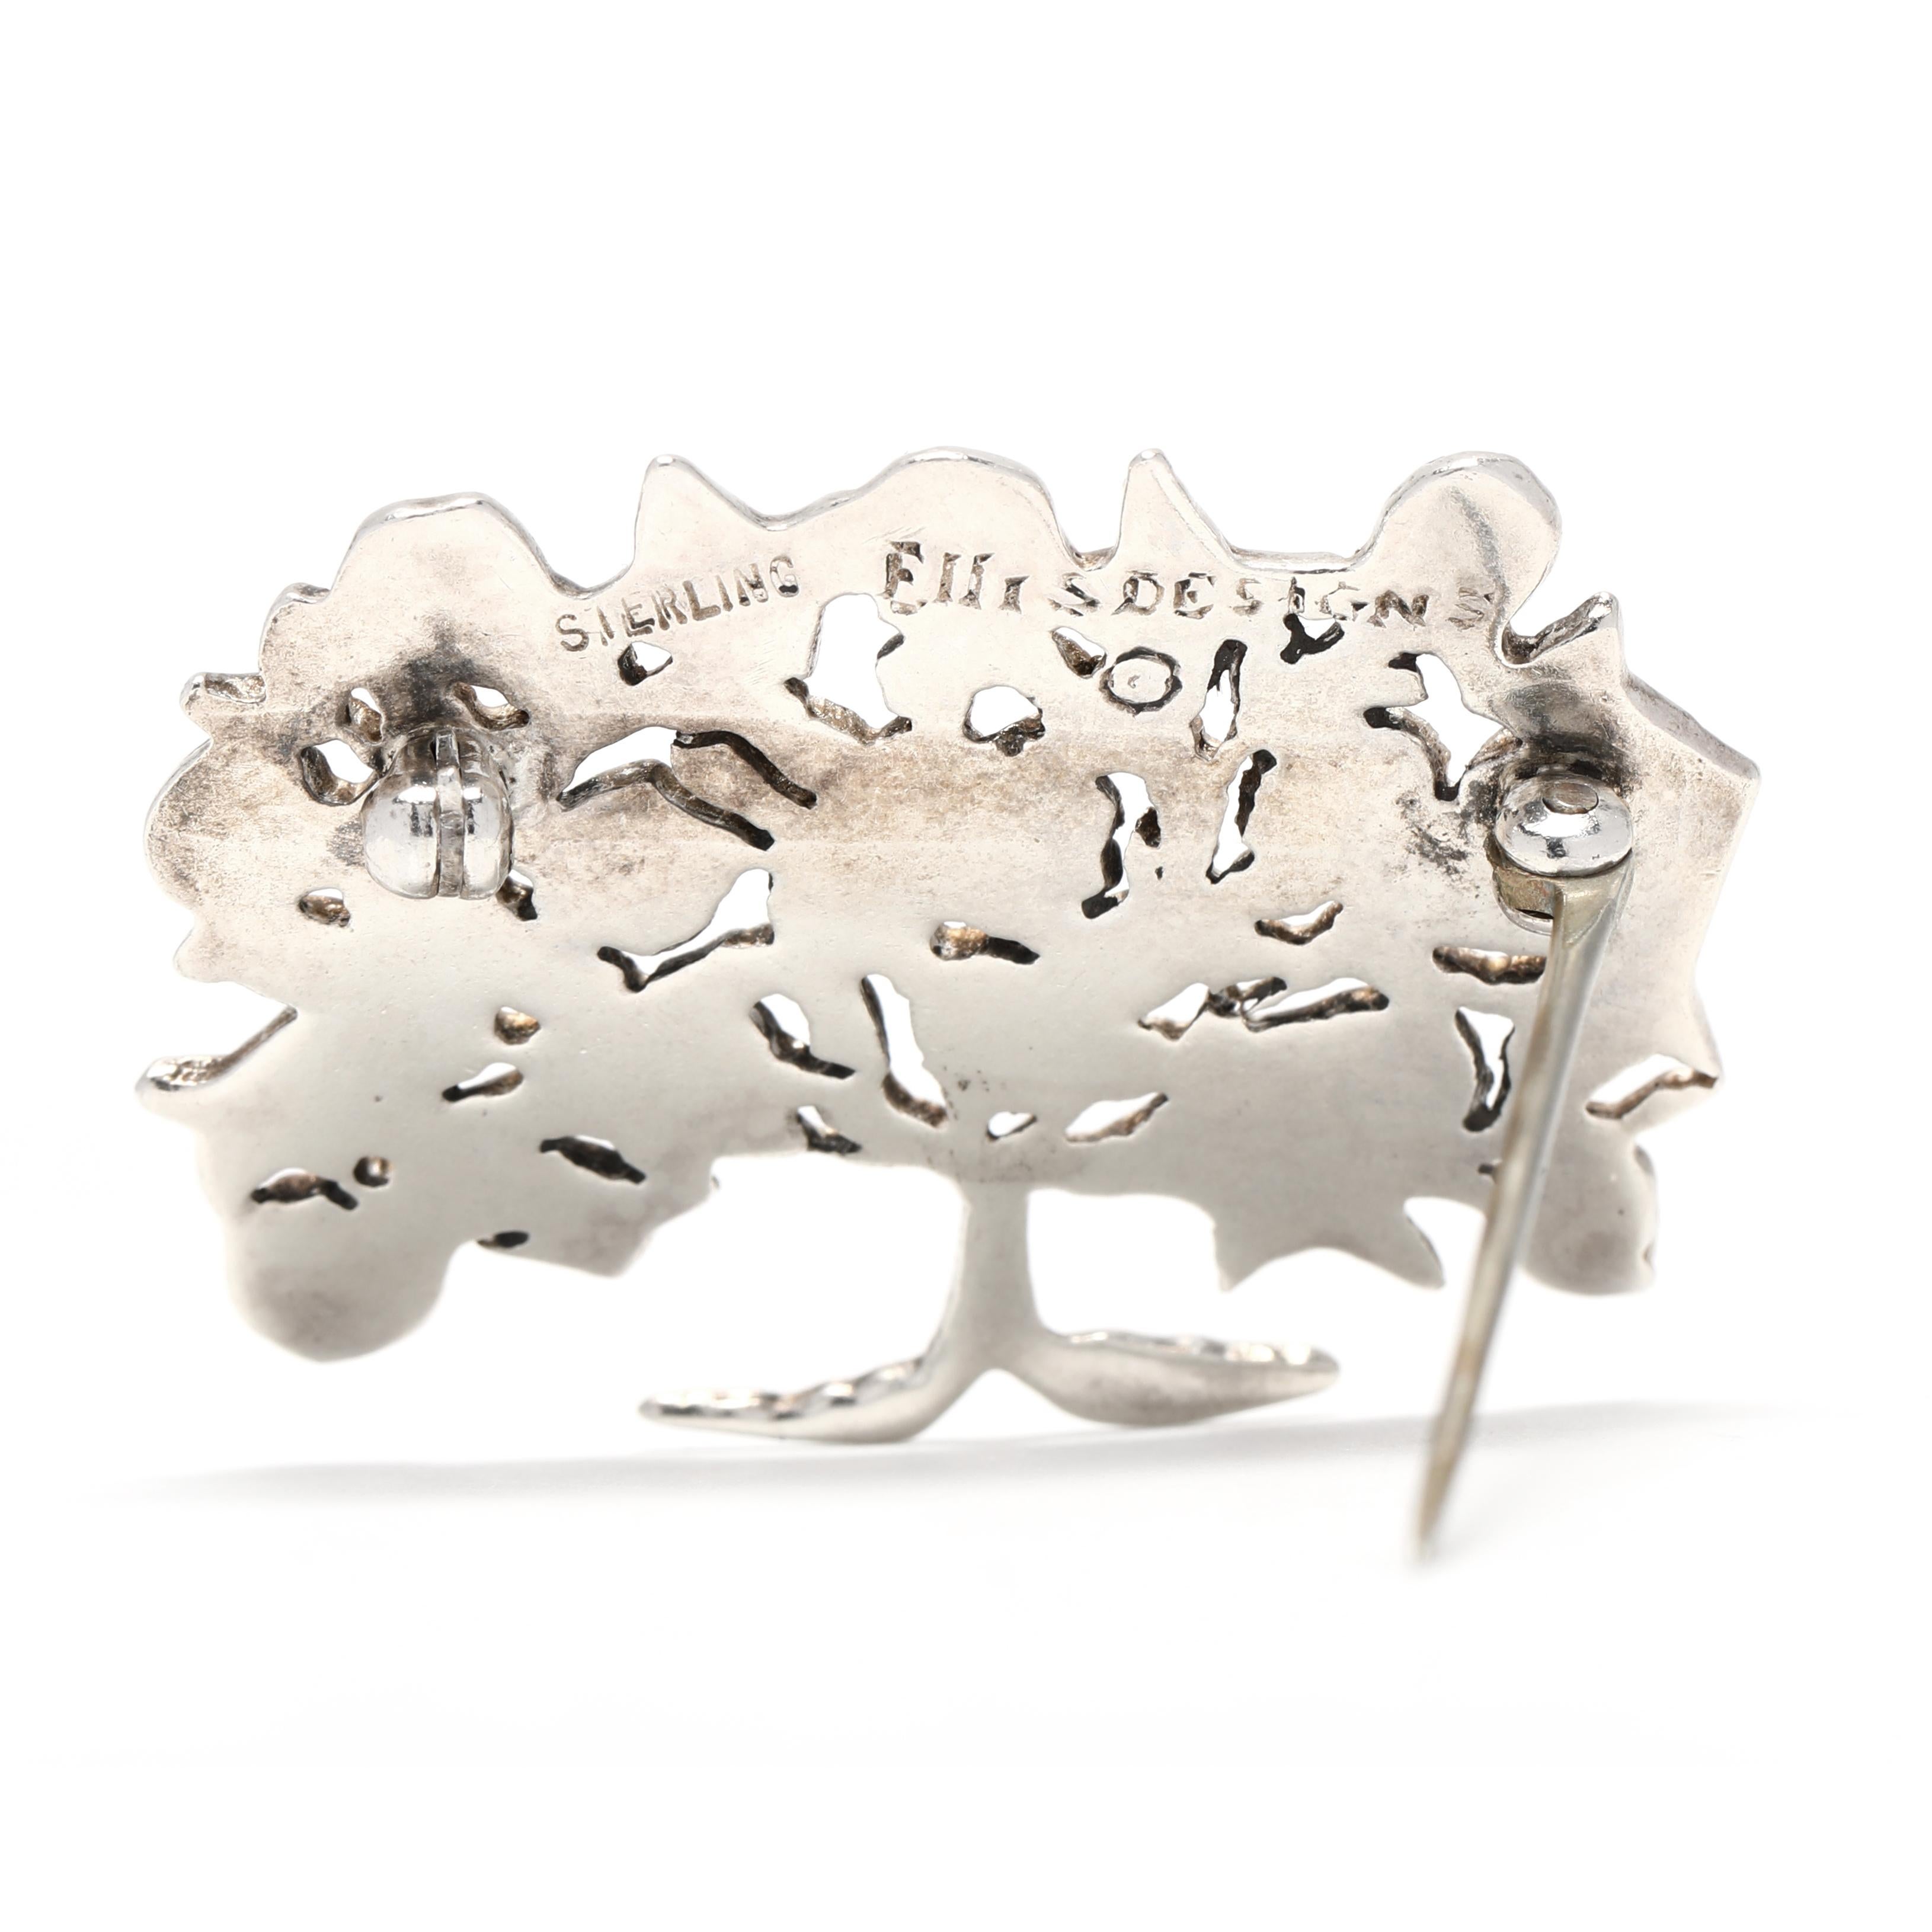 This beautiful tree of life brooch is made from sterling silver and measures 1 inch in length. The flat engraved design features a tree with intricate branches that is sure to be admired. This brooch is perfect to wear on any outfit and will add a